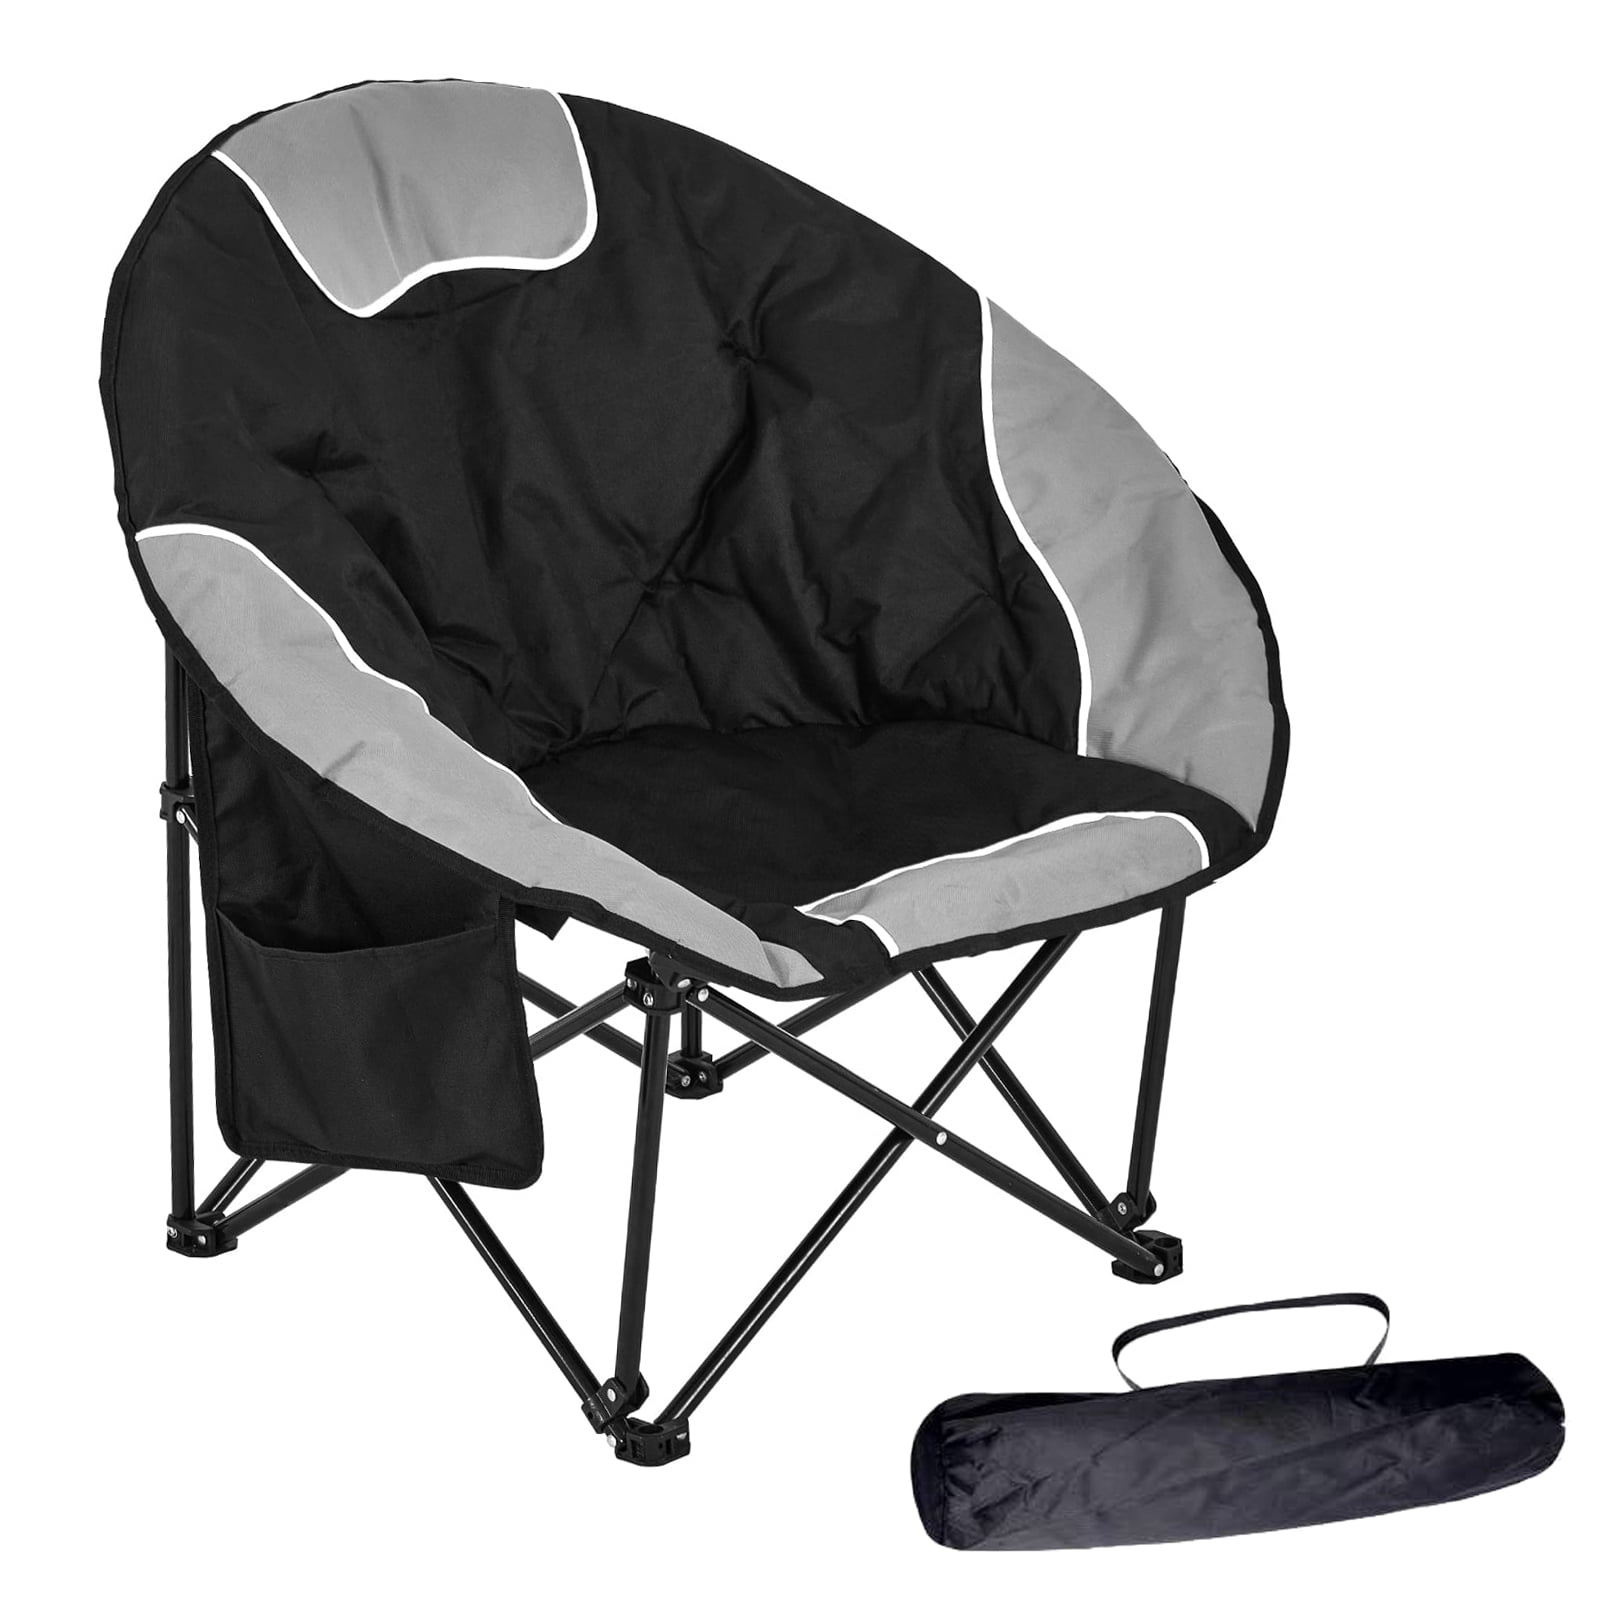 BigDean 2 x Folding Chairs, Camping Chair, Fishing Chair, Black, Robust,  Foldable, up to 120 kg, Load Capacity, Classic Folding Chair, Garden Chair,  Folding Chair for Garden and Camping - Camping 